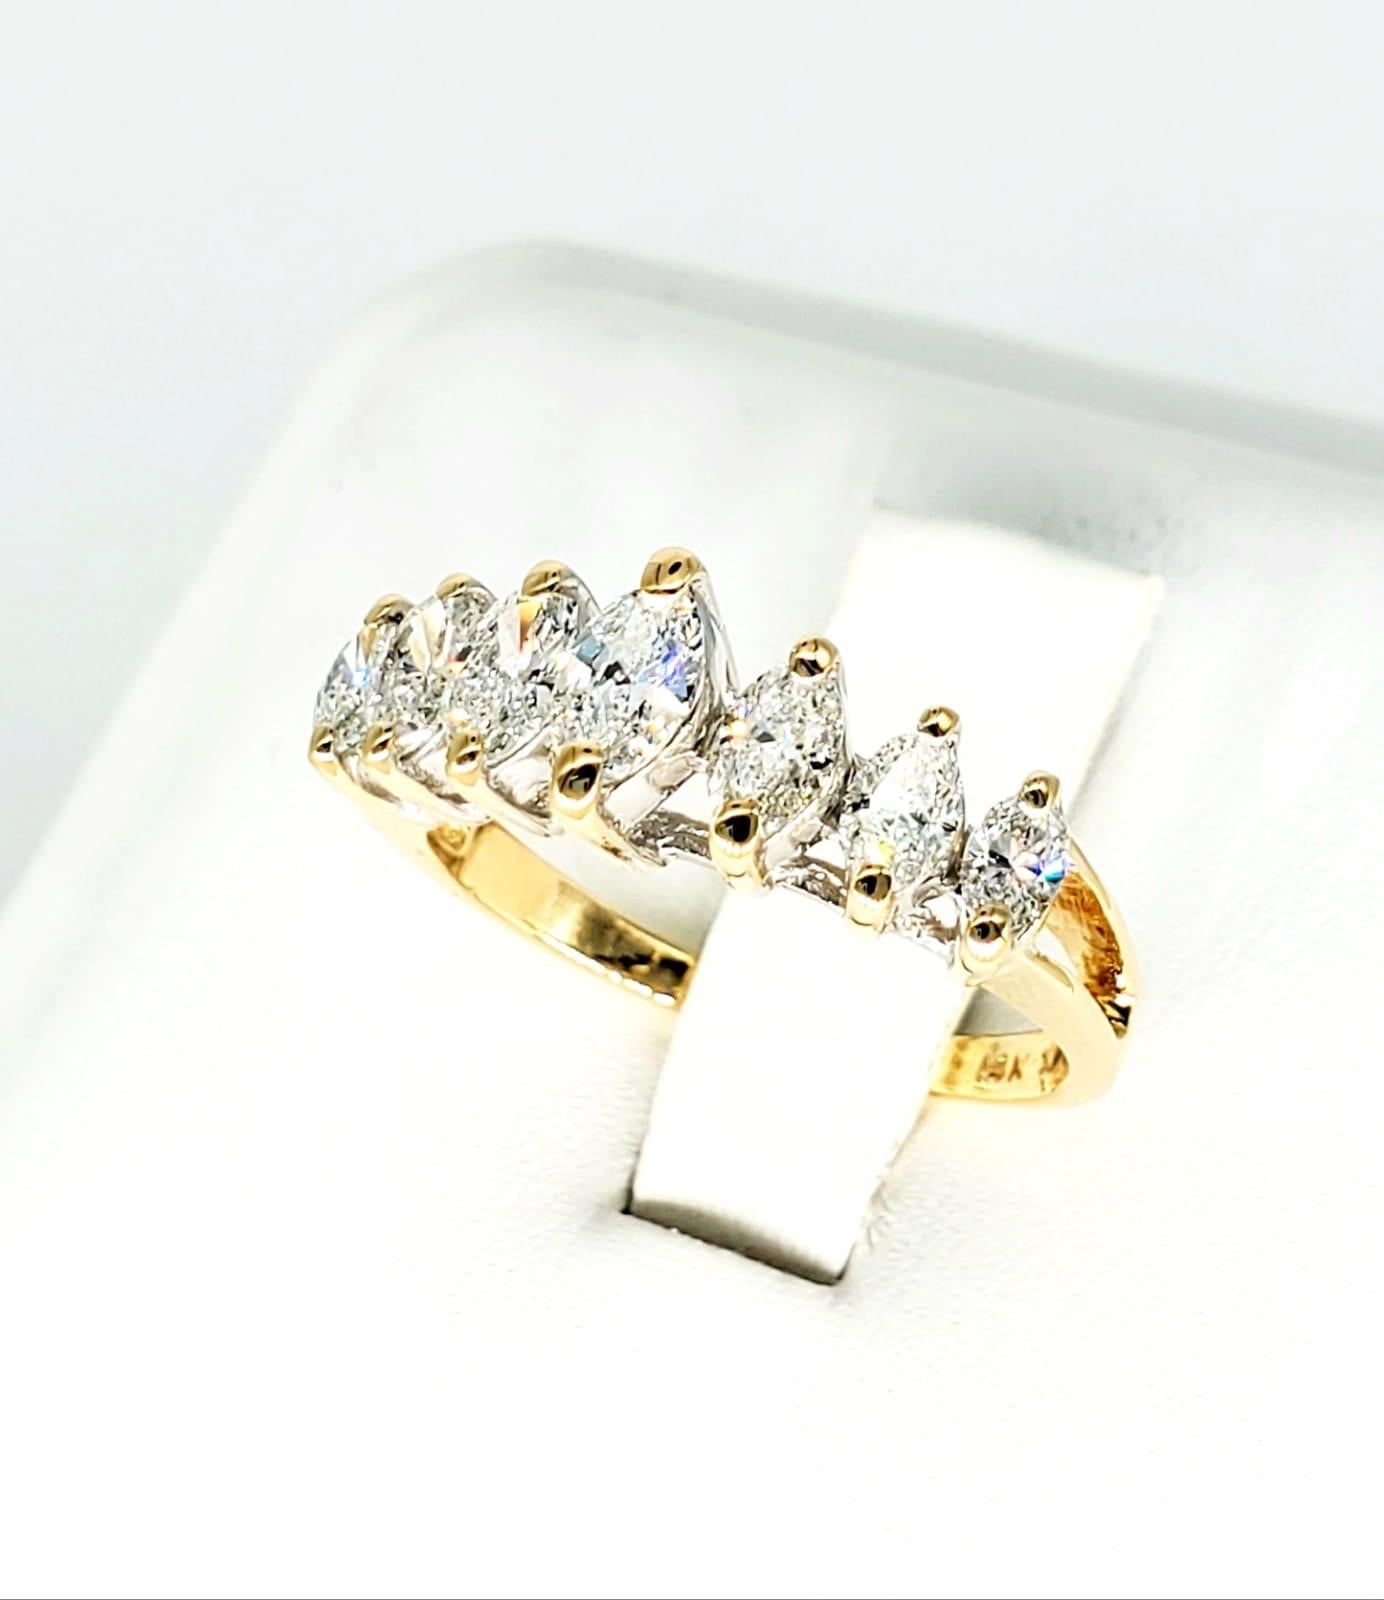 Vintage 1.50 Carat Marquise Diamond Half Eternity Ring. The diamonds are mounted on white gold so it brings the diamonds a lot more life and beauty while being surrounded by the yellow gold throughout the rest of the ring. There are 7 diamonds